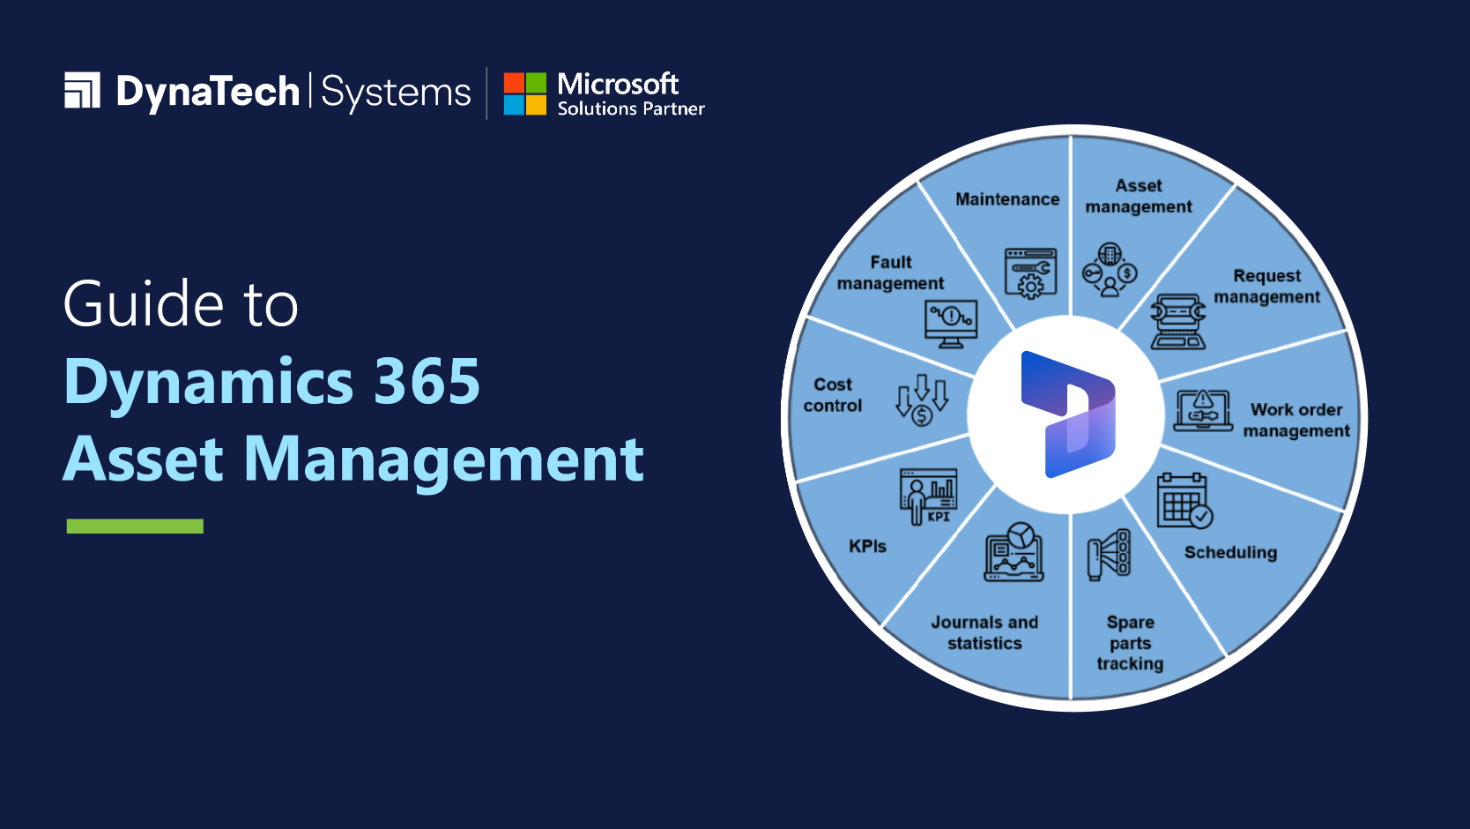 Guide to Dynamics 365 Asset Management